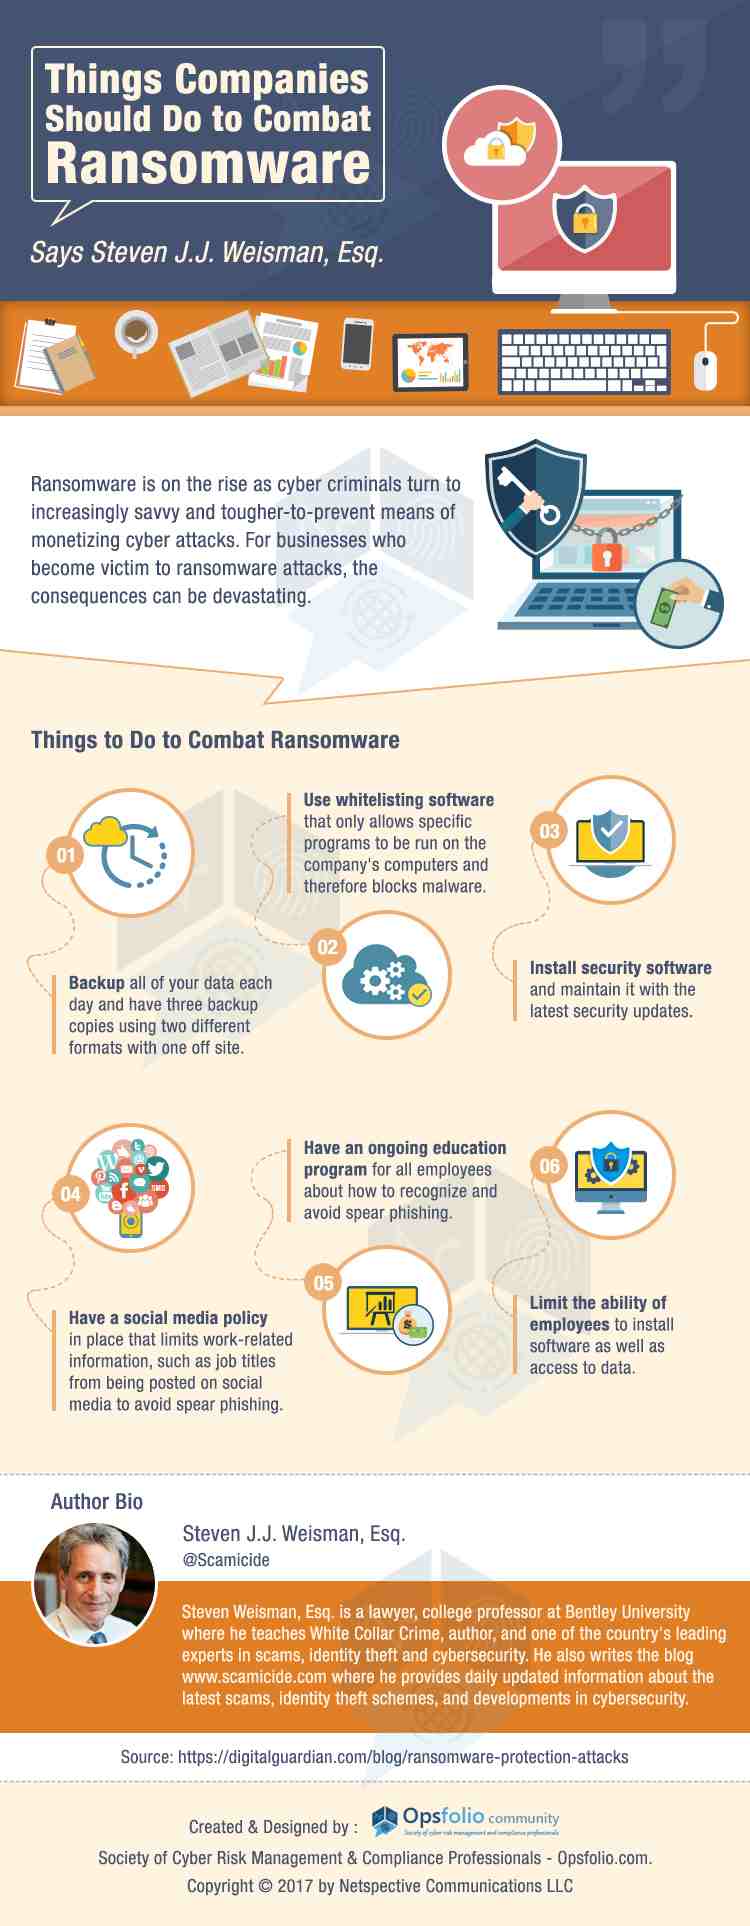 Things Companies Should Do to Combat Ransomware